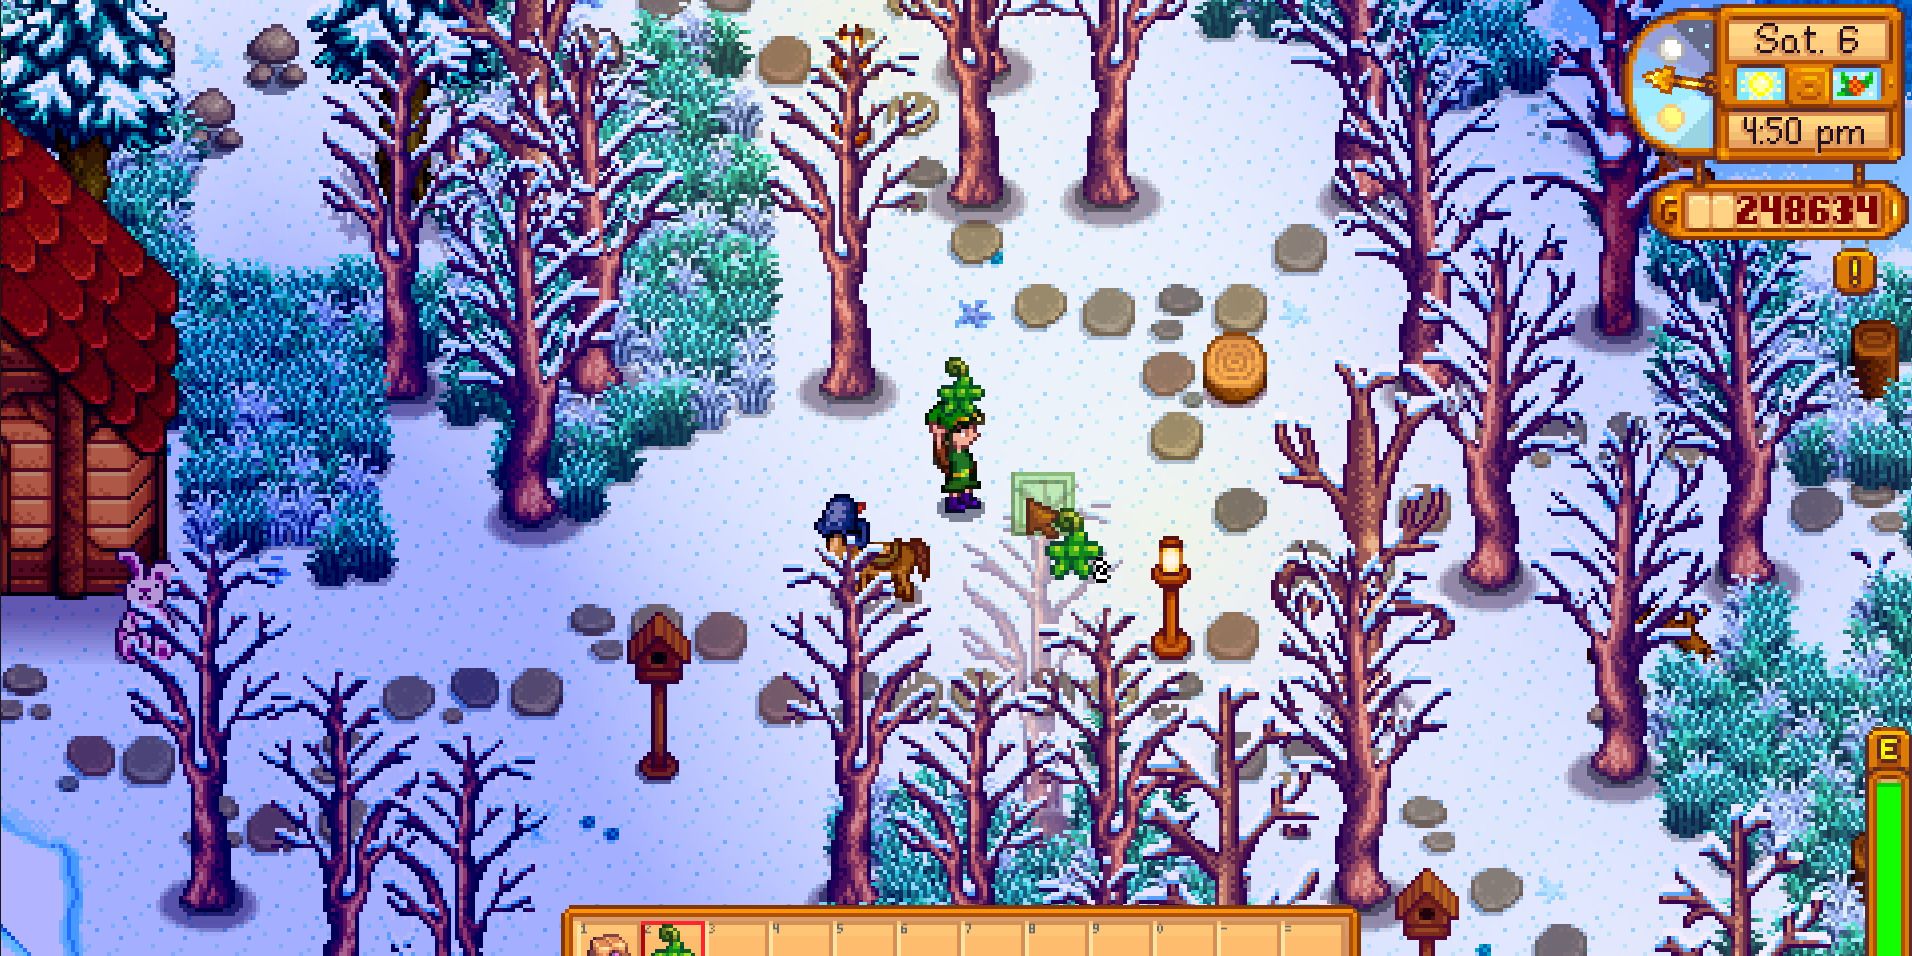 Image of a character planting a Mossy Seed in Stardew Valley